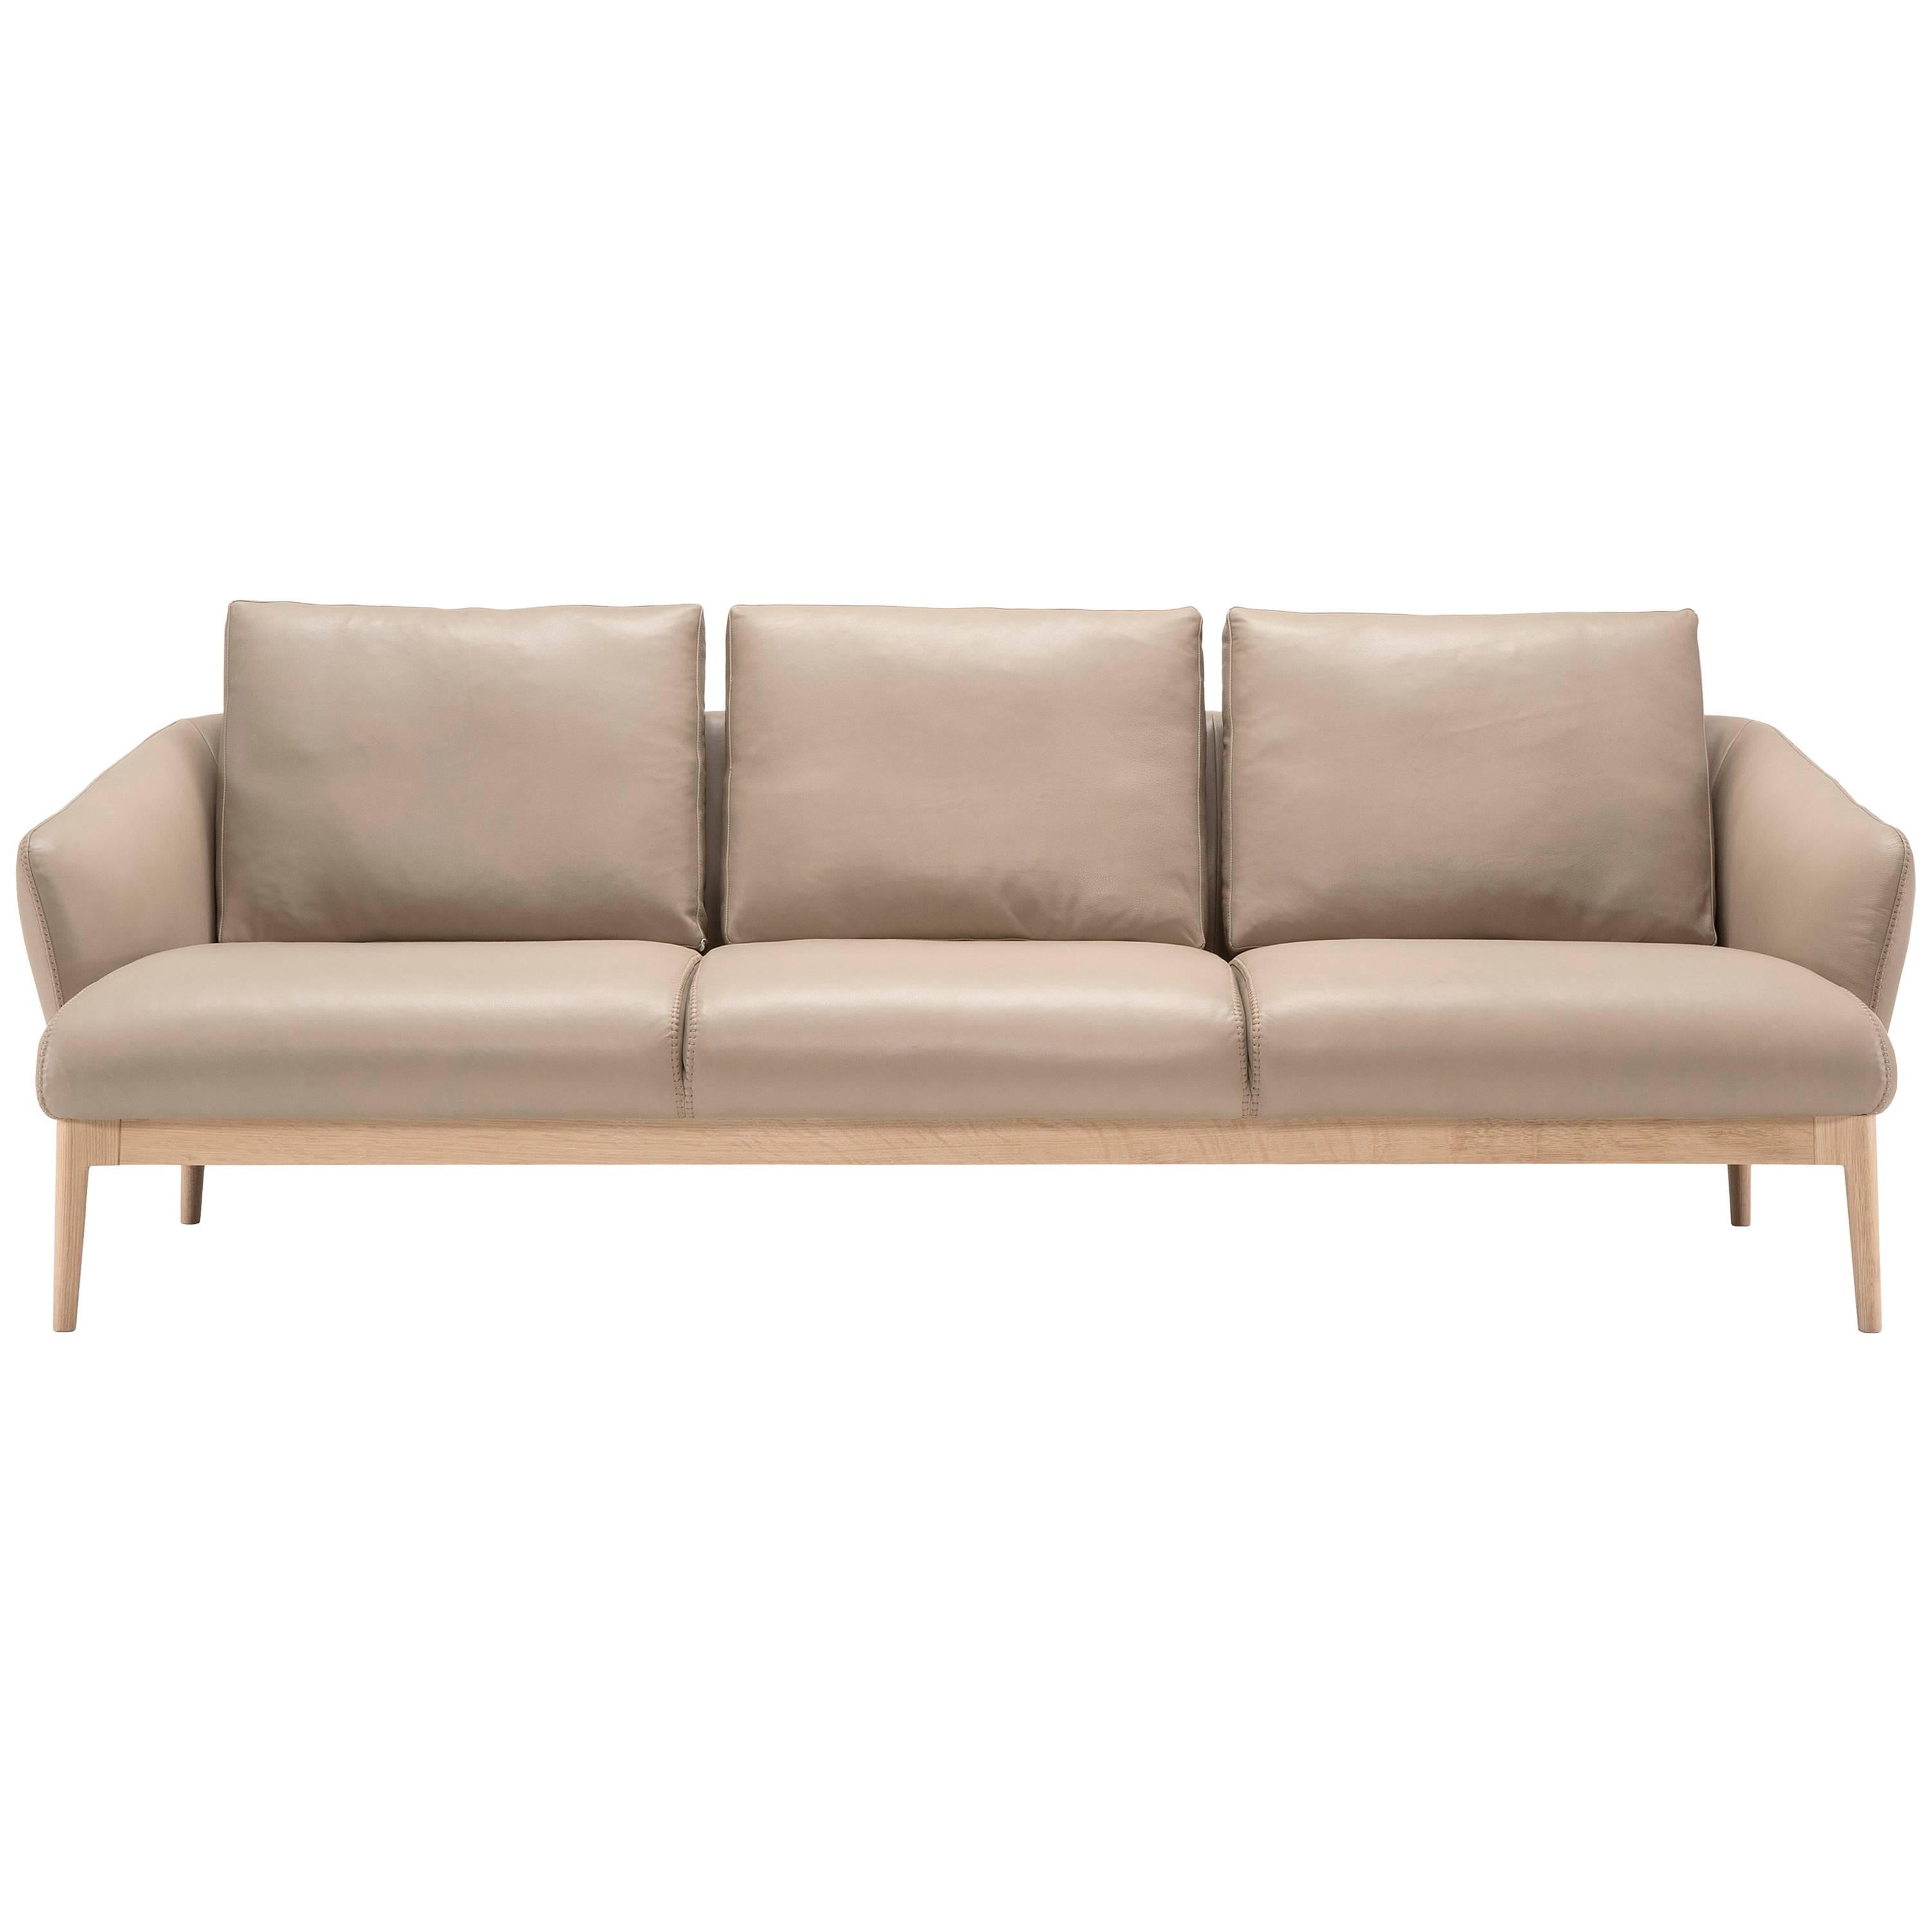 Theo Sofa in Tan Leather by Maurizio Marconato & Terry Zappa For Sale